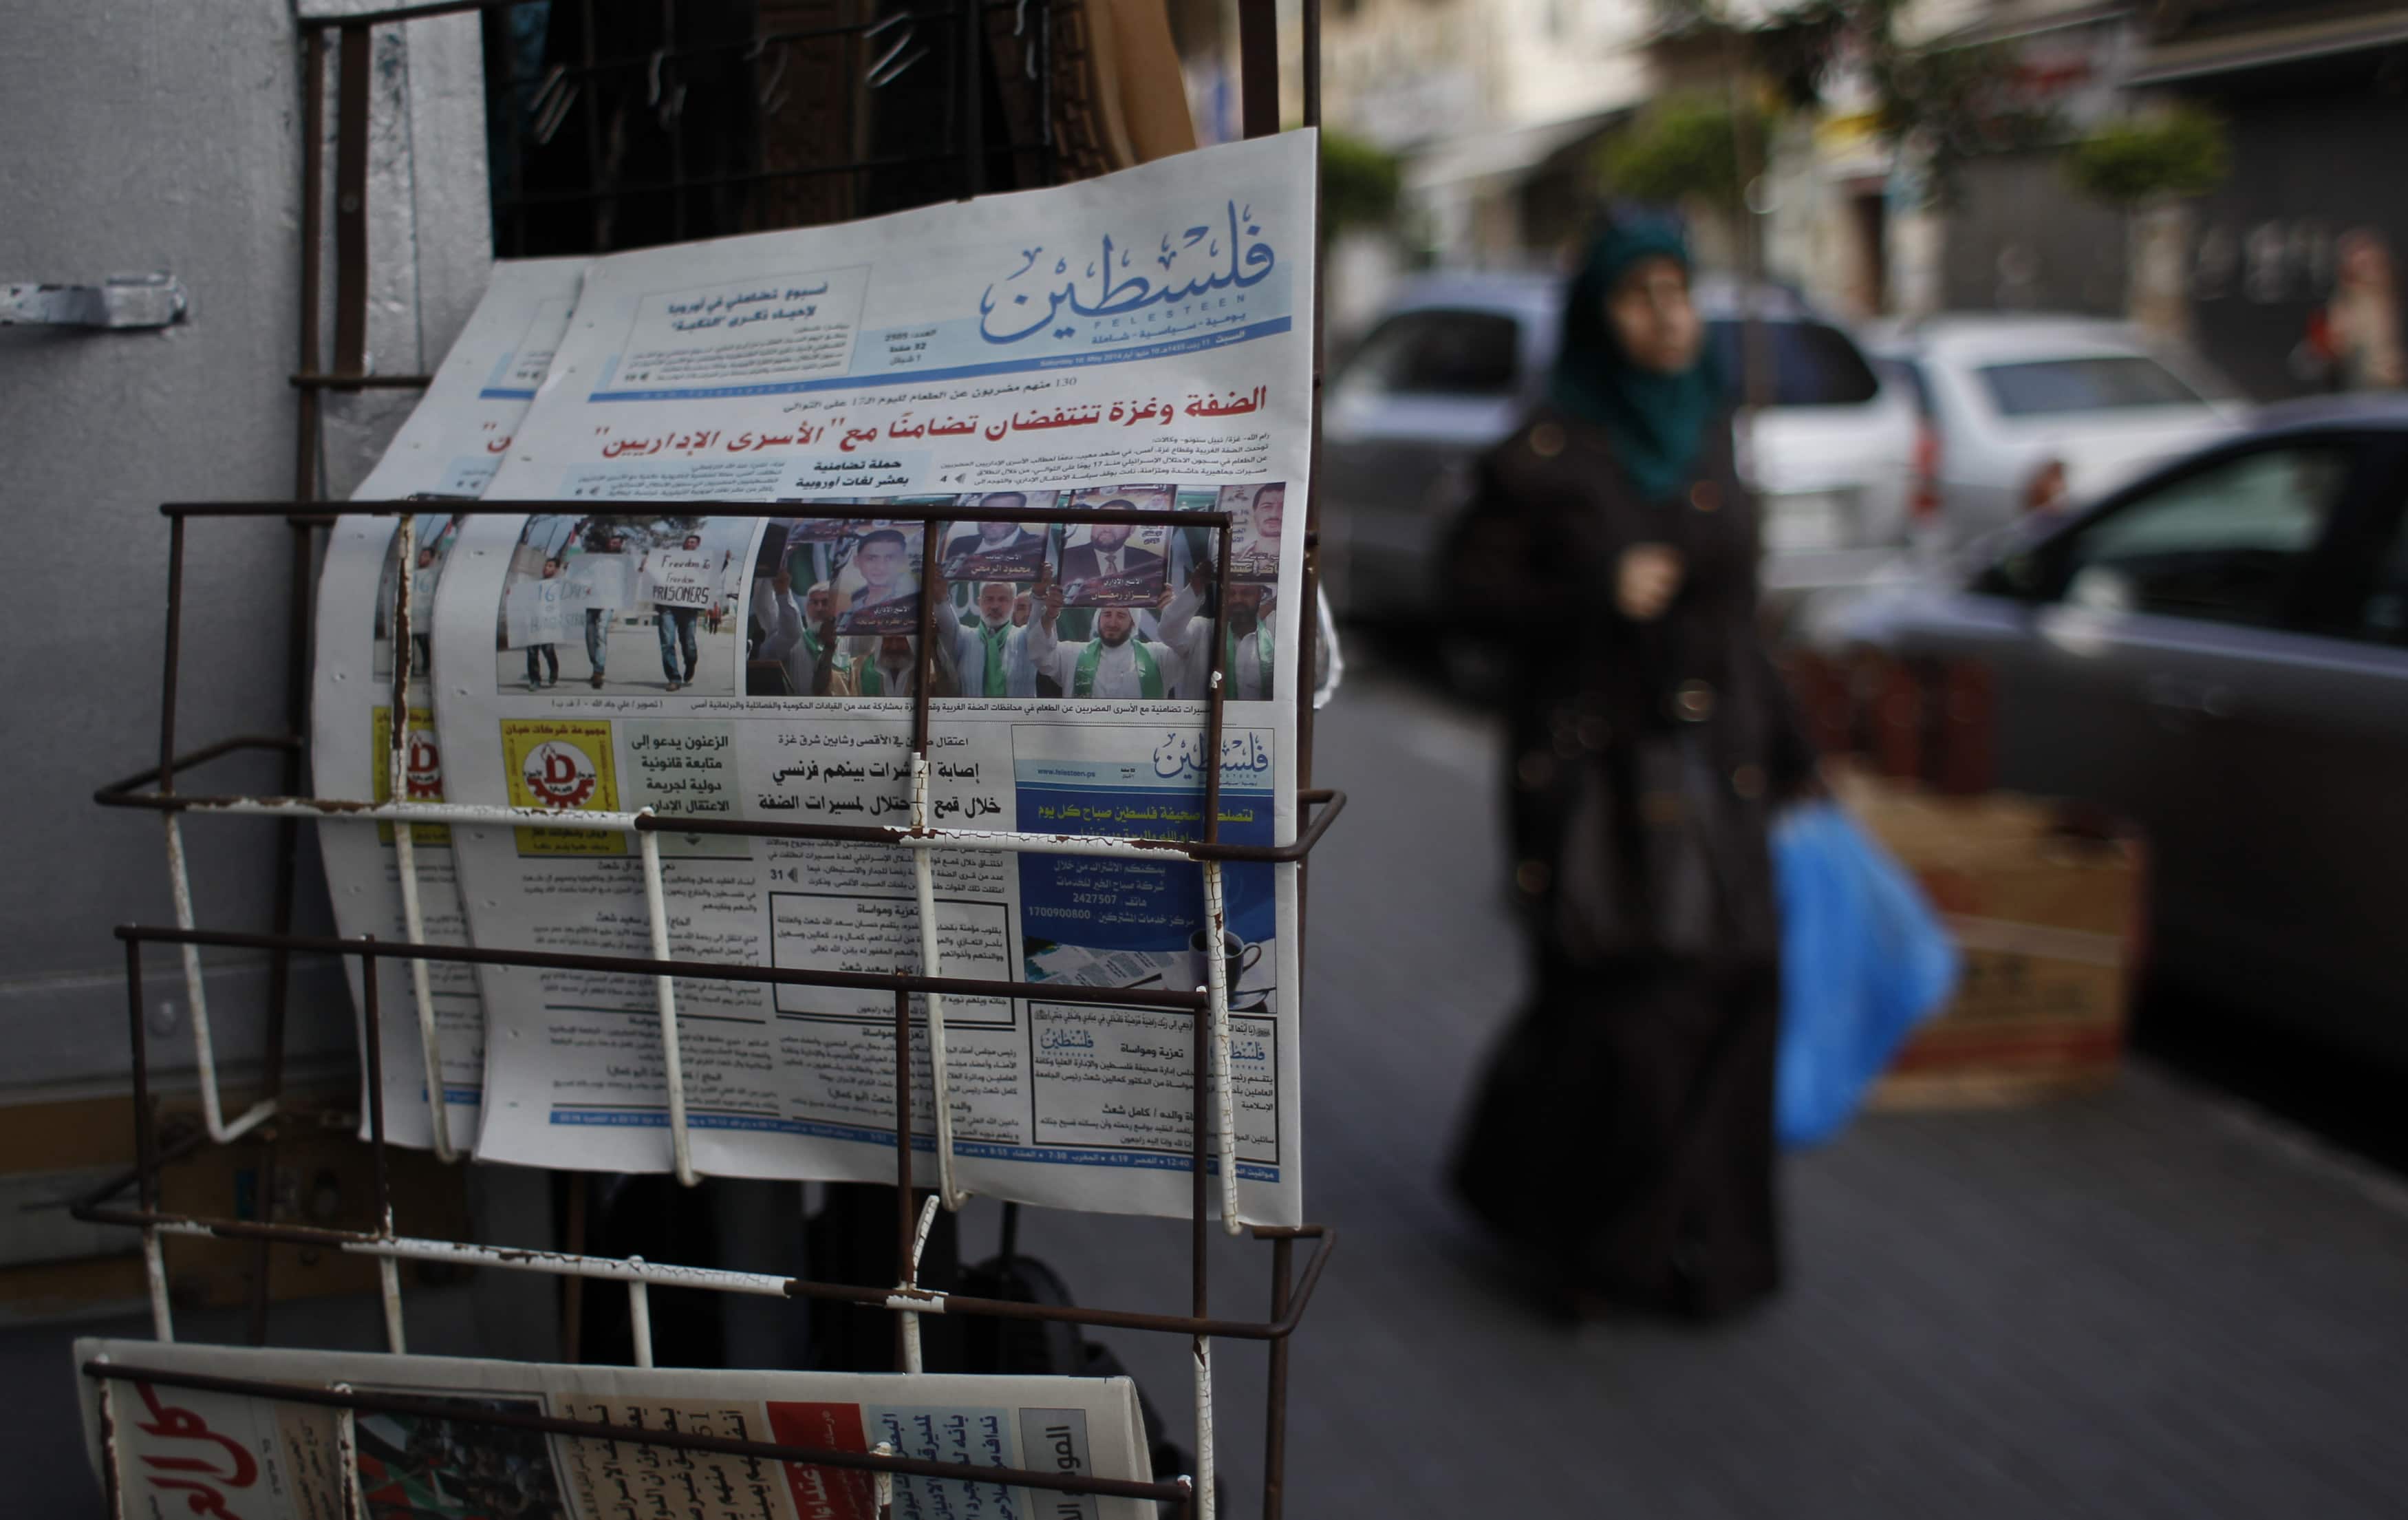 A Palestinian woman walks past copies of a pro-Hamas newspaper outside a shop in the West Bank, REUTERS/Mohamad Torokman